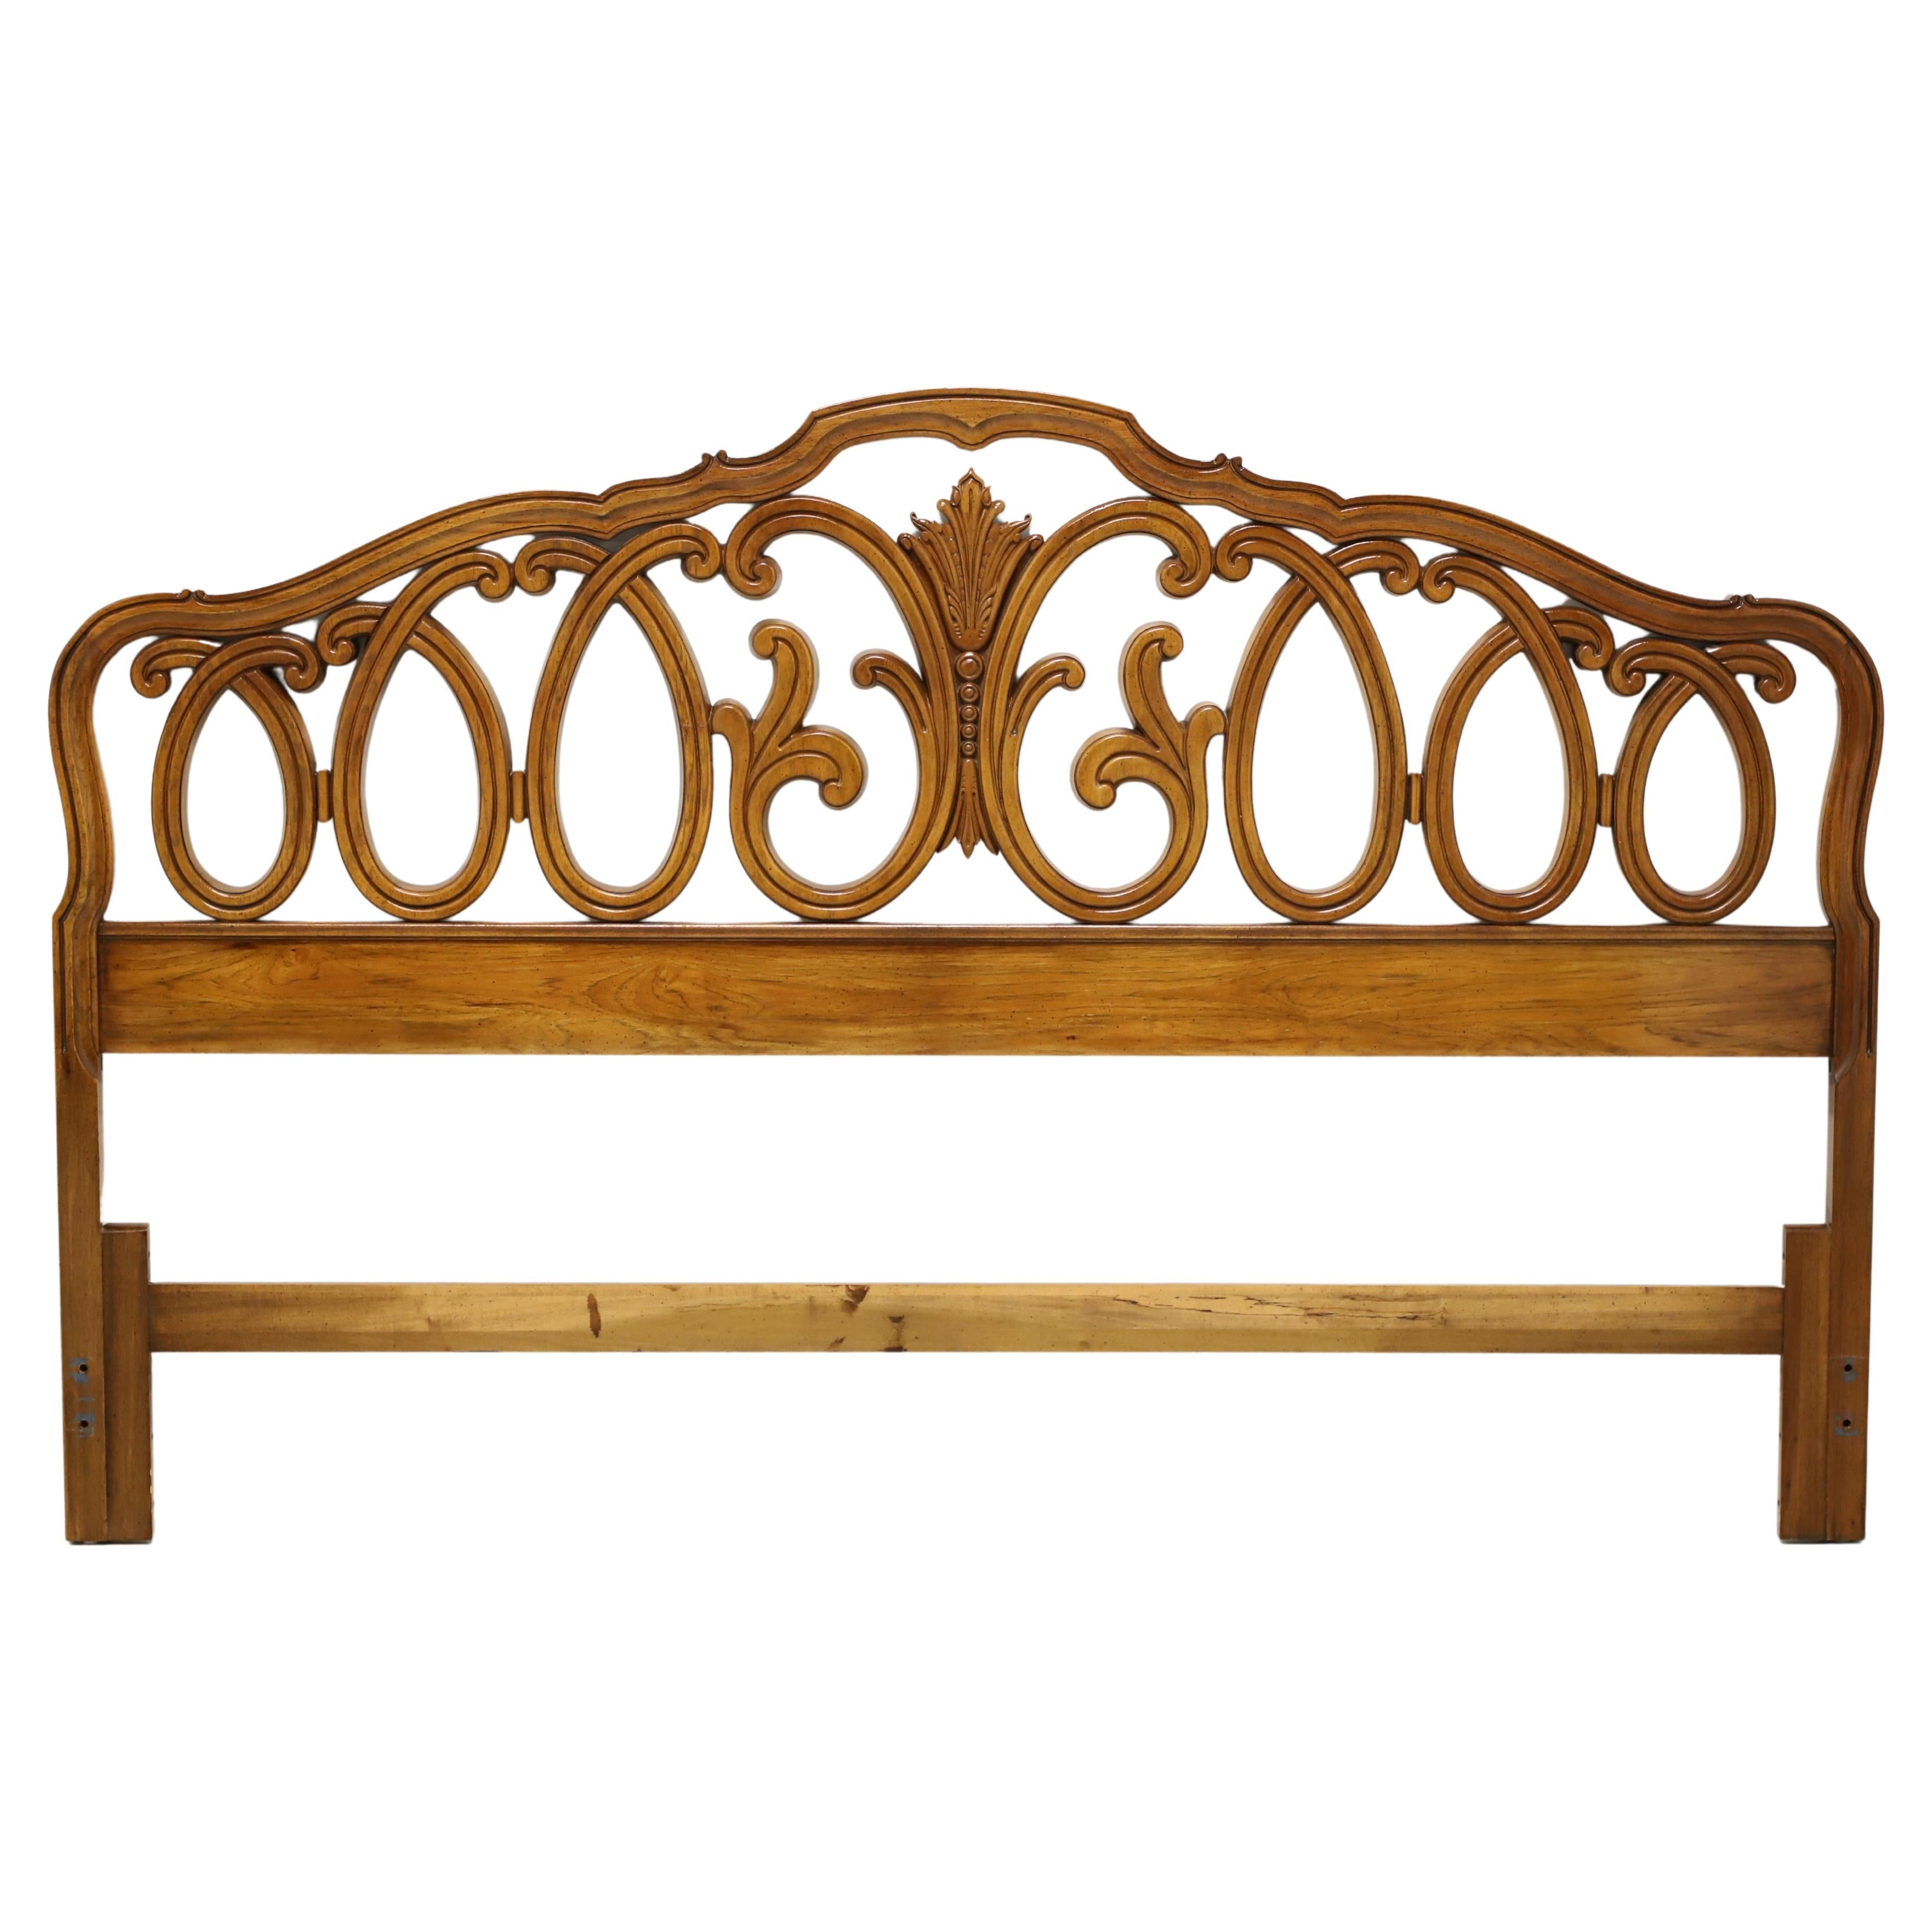 THOMASVILLE Pecan French Country King Size Headboard